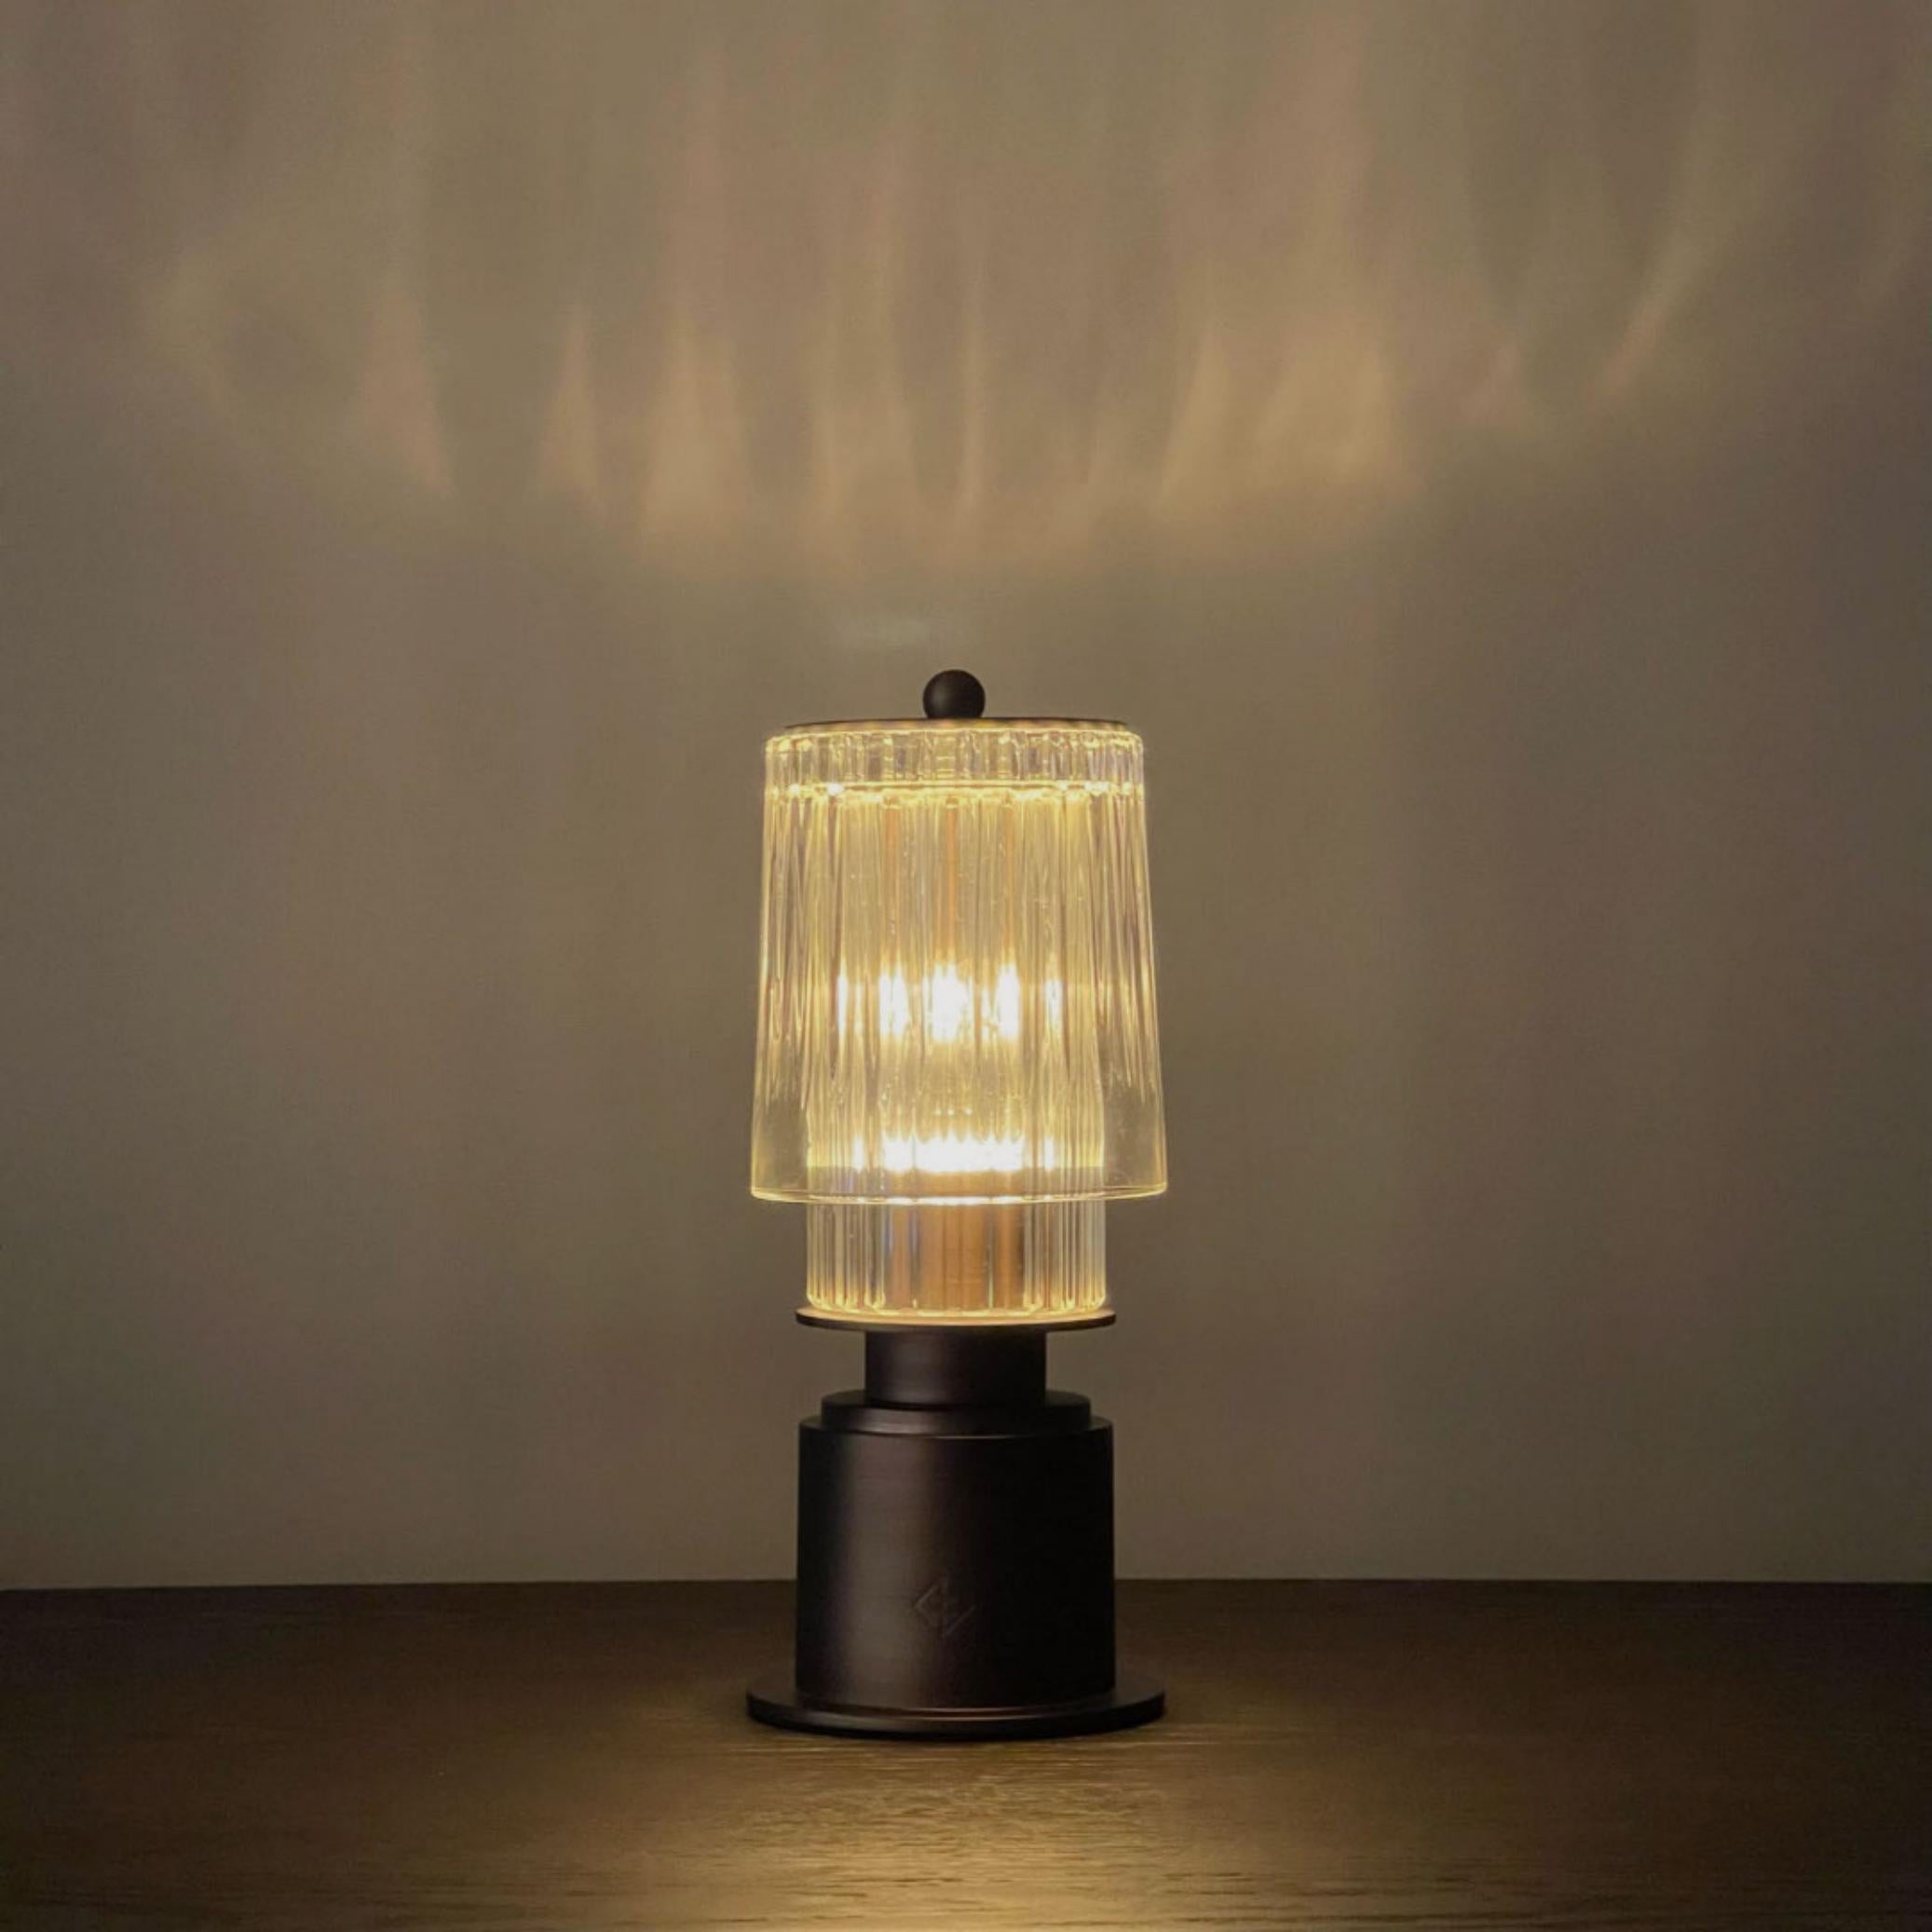 Re-imagining the Classic gaslamp with this artisanal portable lamp design. employing a palette of cut-glass and anodized bronze, the lamp is suitable to highlight any dining setting or accentuate any corner of your home with a dash of